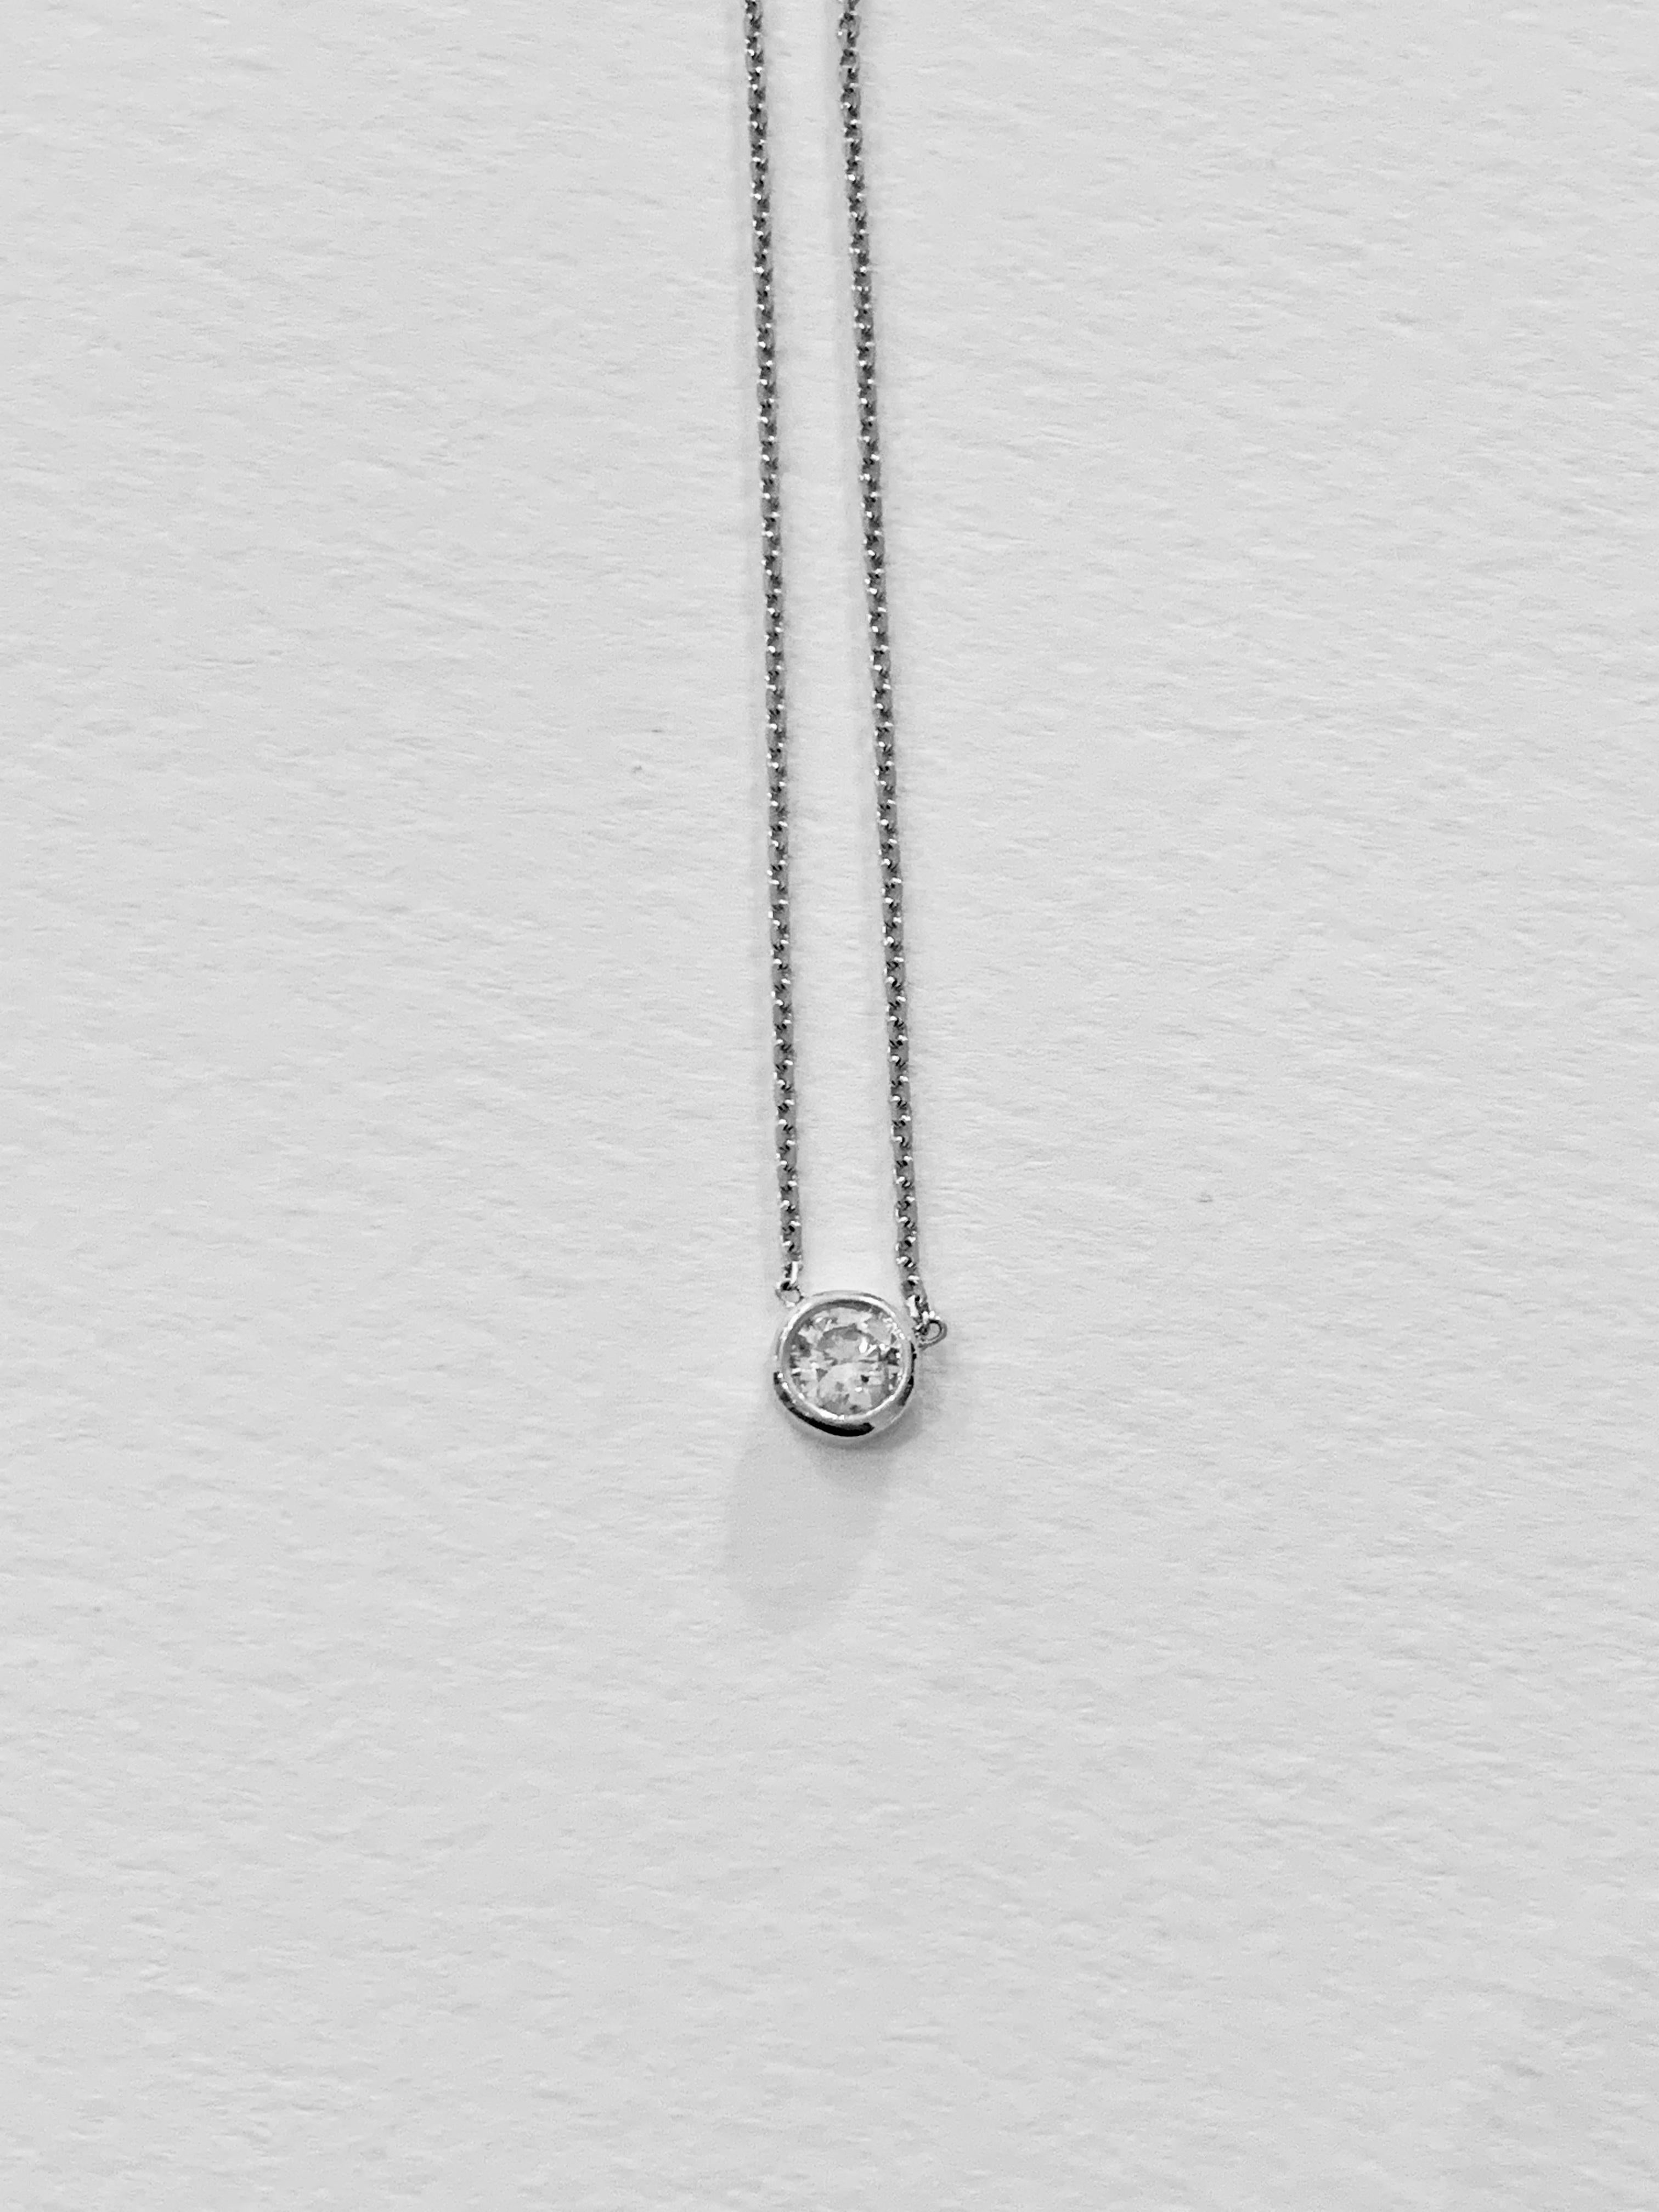 This is a very elegant and delicate bezel design necklace,  16 inches in length with the intention for it to be worn close to the neck to give a shimmer of a stone and to be constantly on show.  The .41 ct Round Brilliant Cut Diamond has a colour of